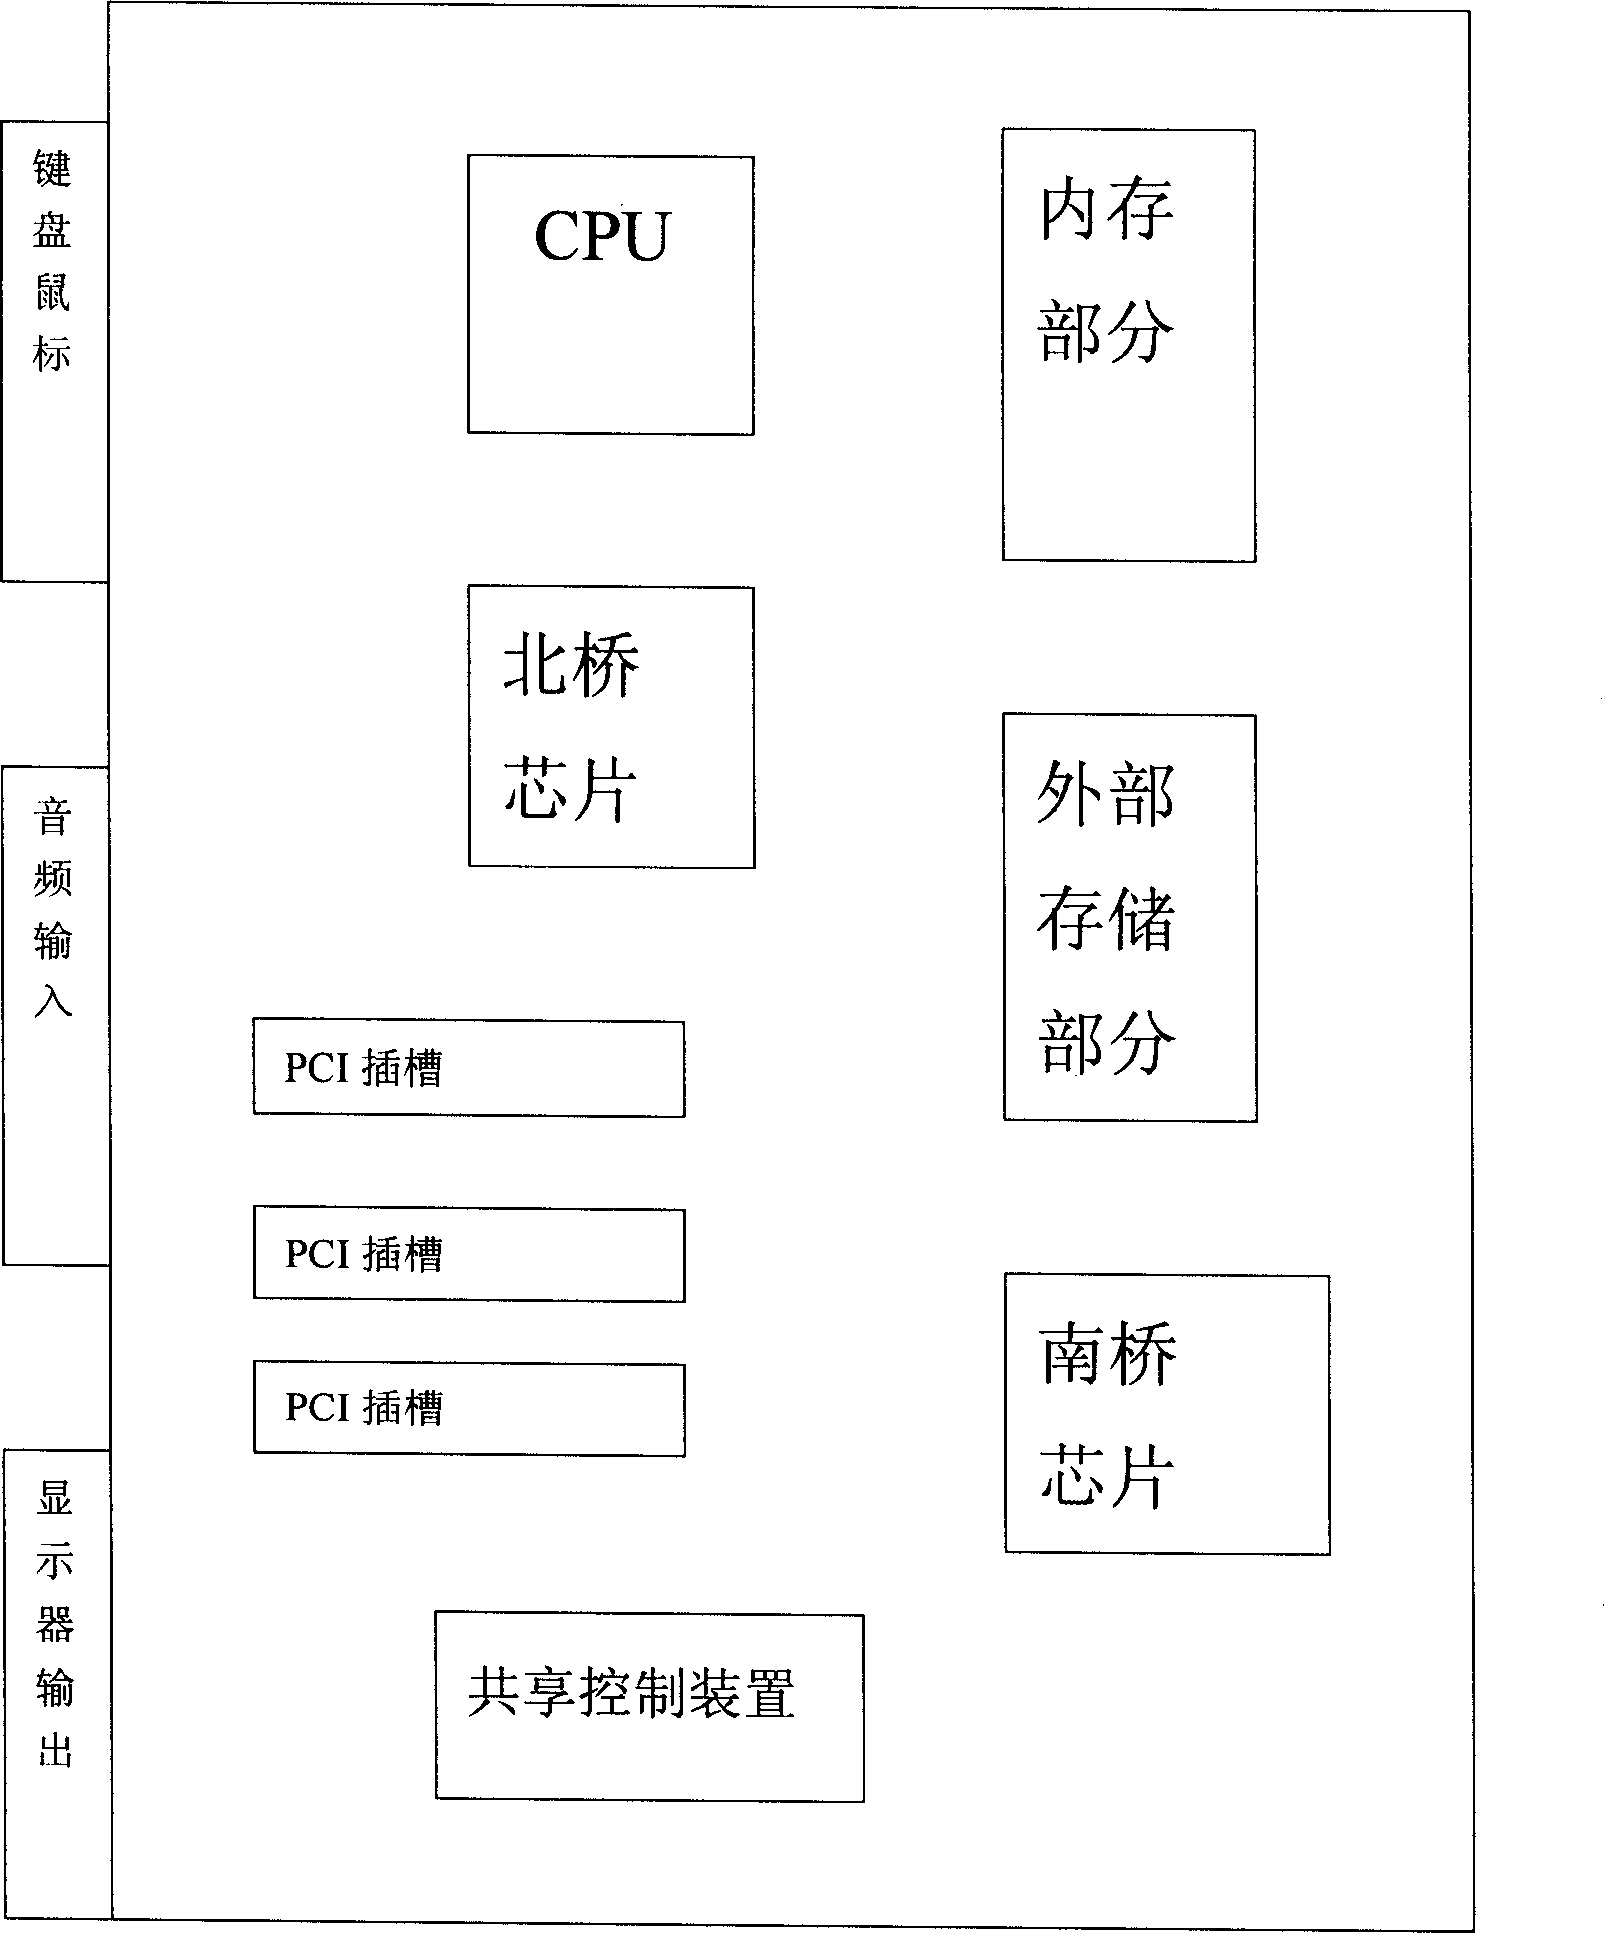 System for multi-user sharing internal and external storage of computer